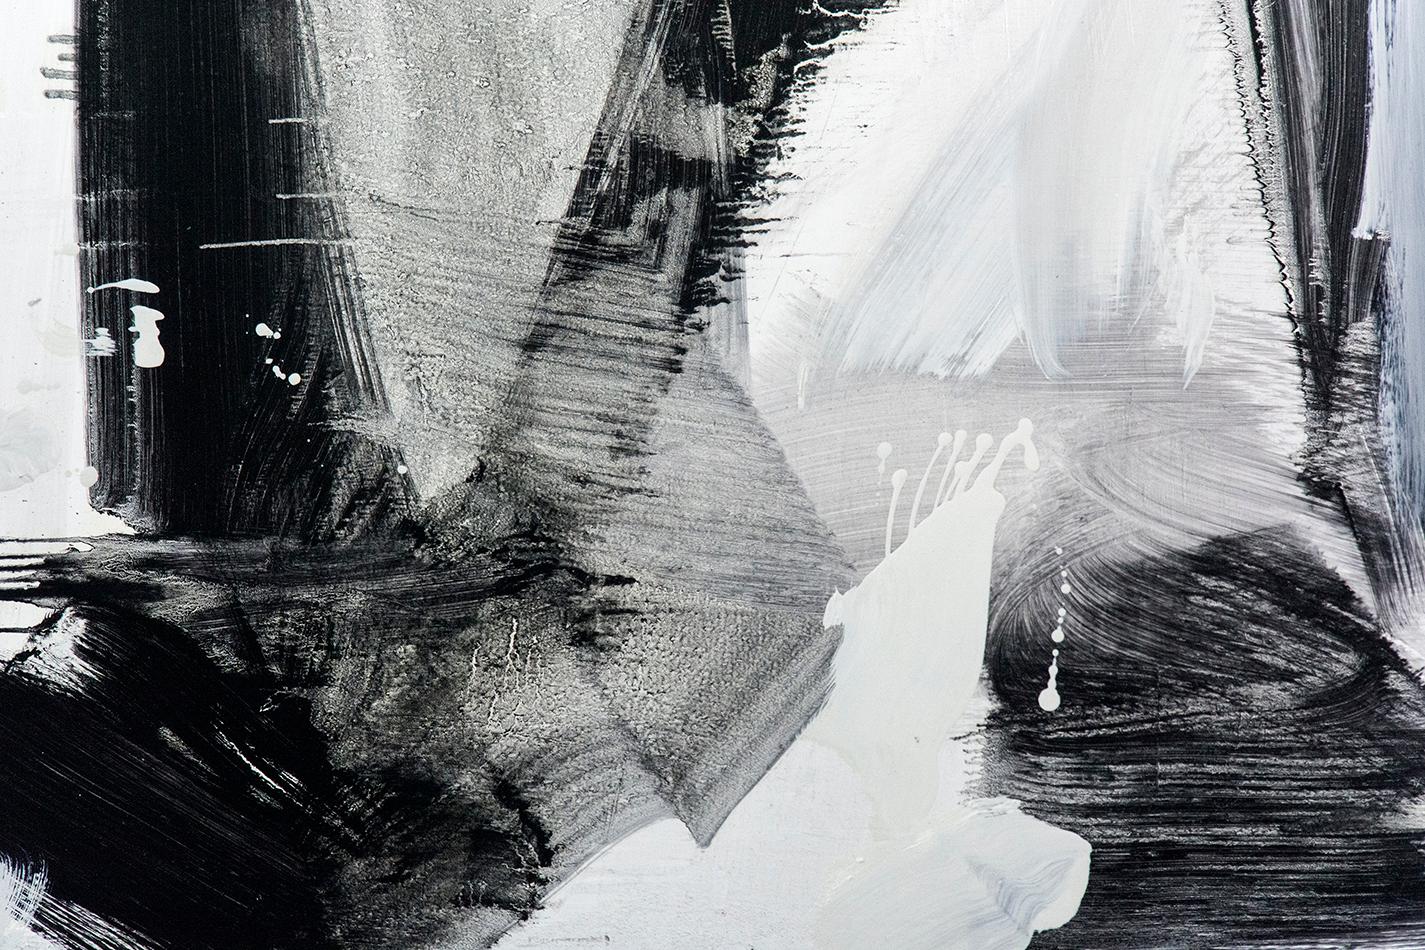 Hvodjra No 13 - large, black, white, grey, gestural abstract, oil on canvas - Contemporary Painting by Scott Pattinson